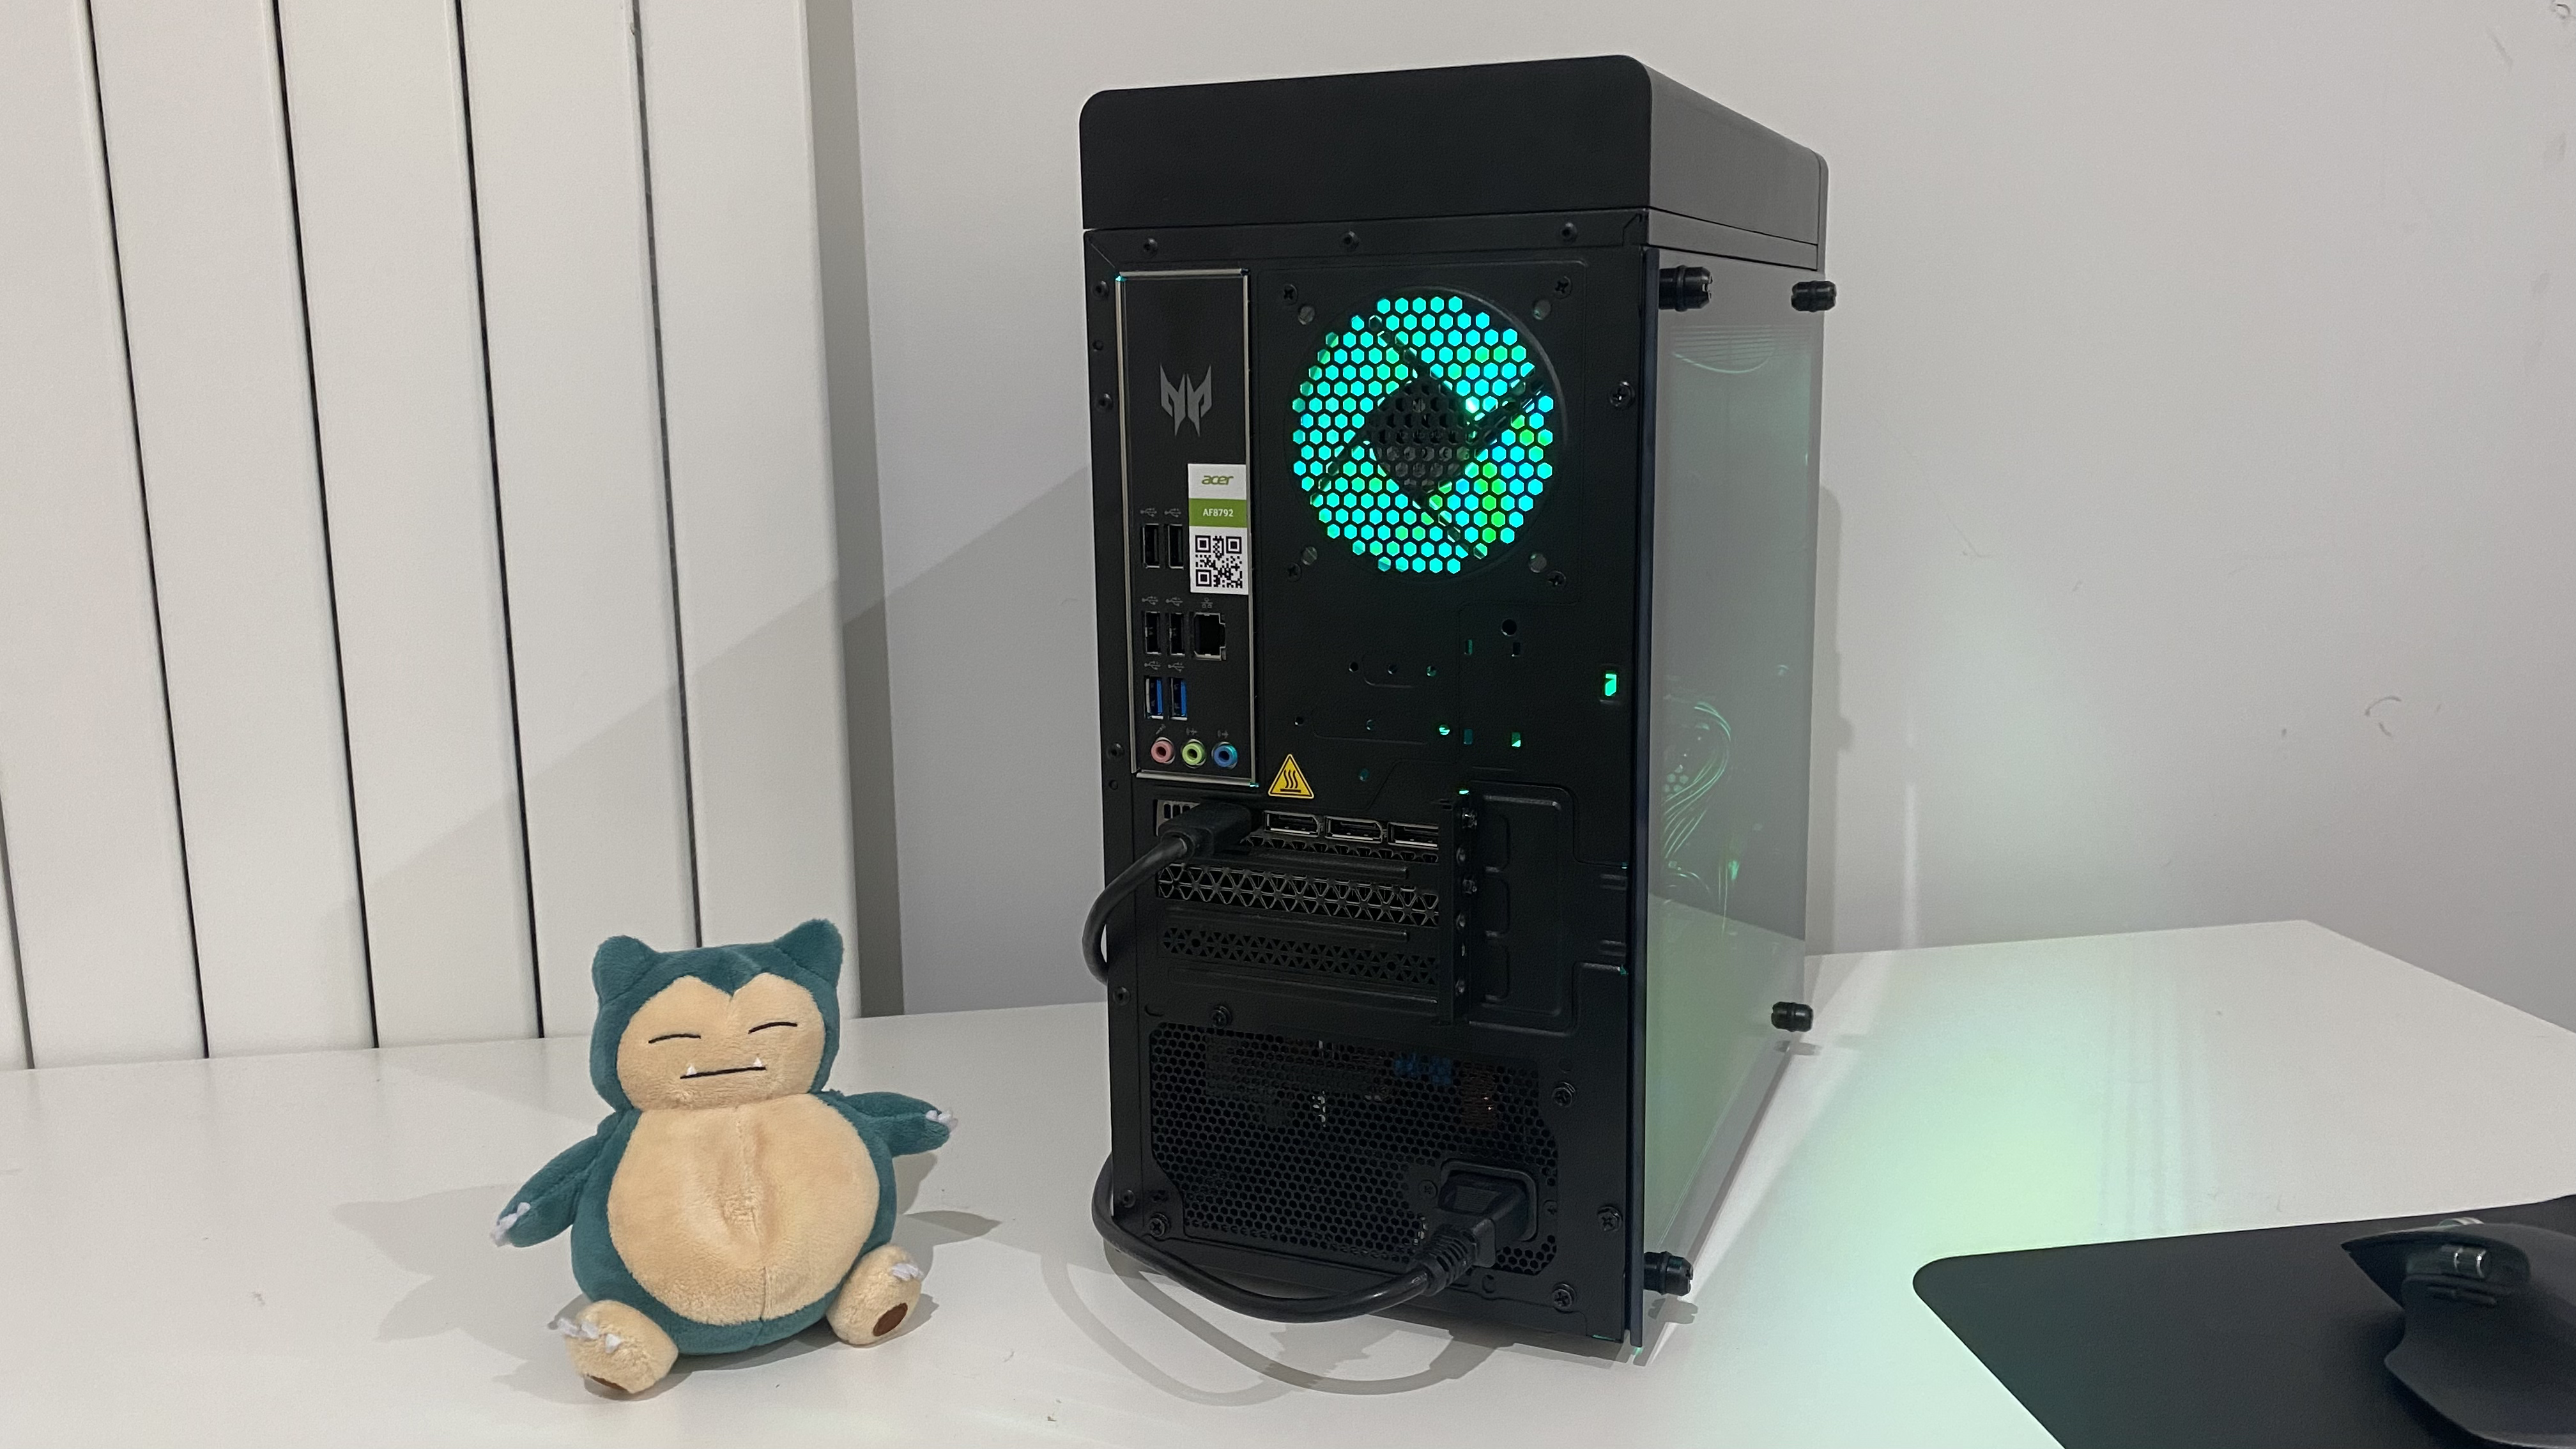 Acer Predator Orion 3000 desktop gaming PC shown from the rear. A Snorlax Pokemon plushie sits next to it.